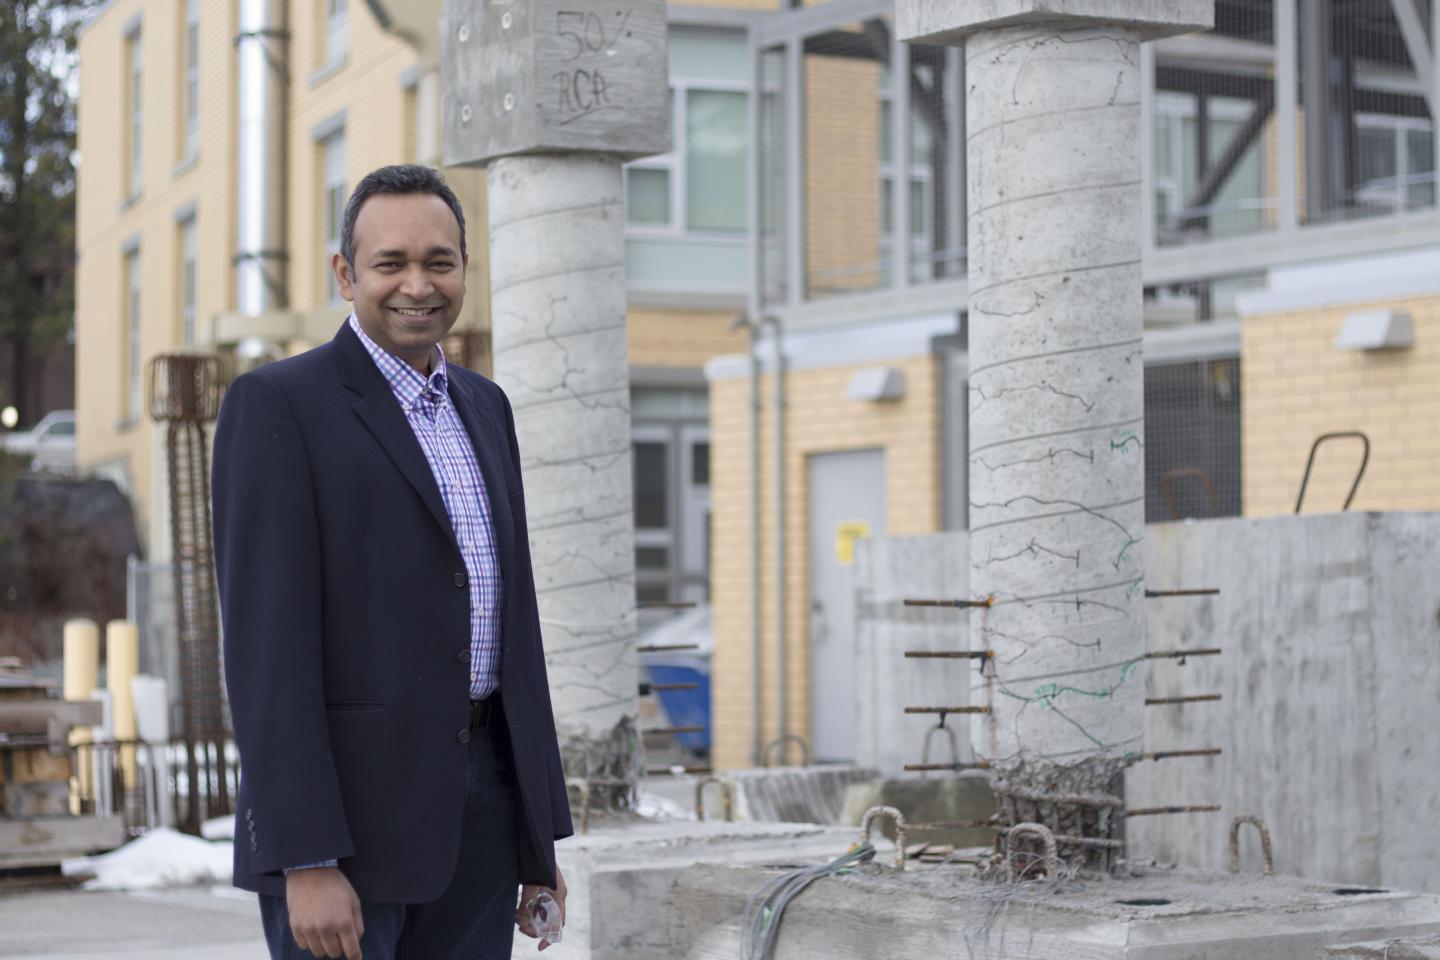 Shahria Alam, co-director of UBC's Green Construction Research and Training Centre and the lead investigator of the study. Source: UBC Okanagan